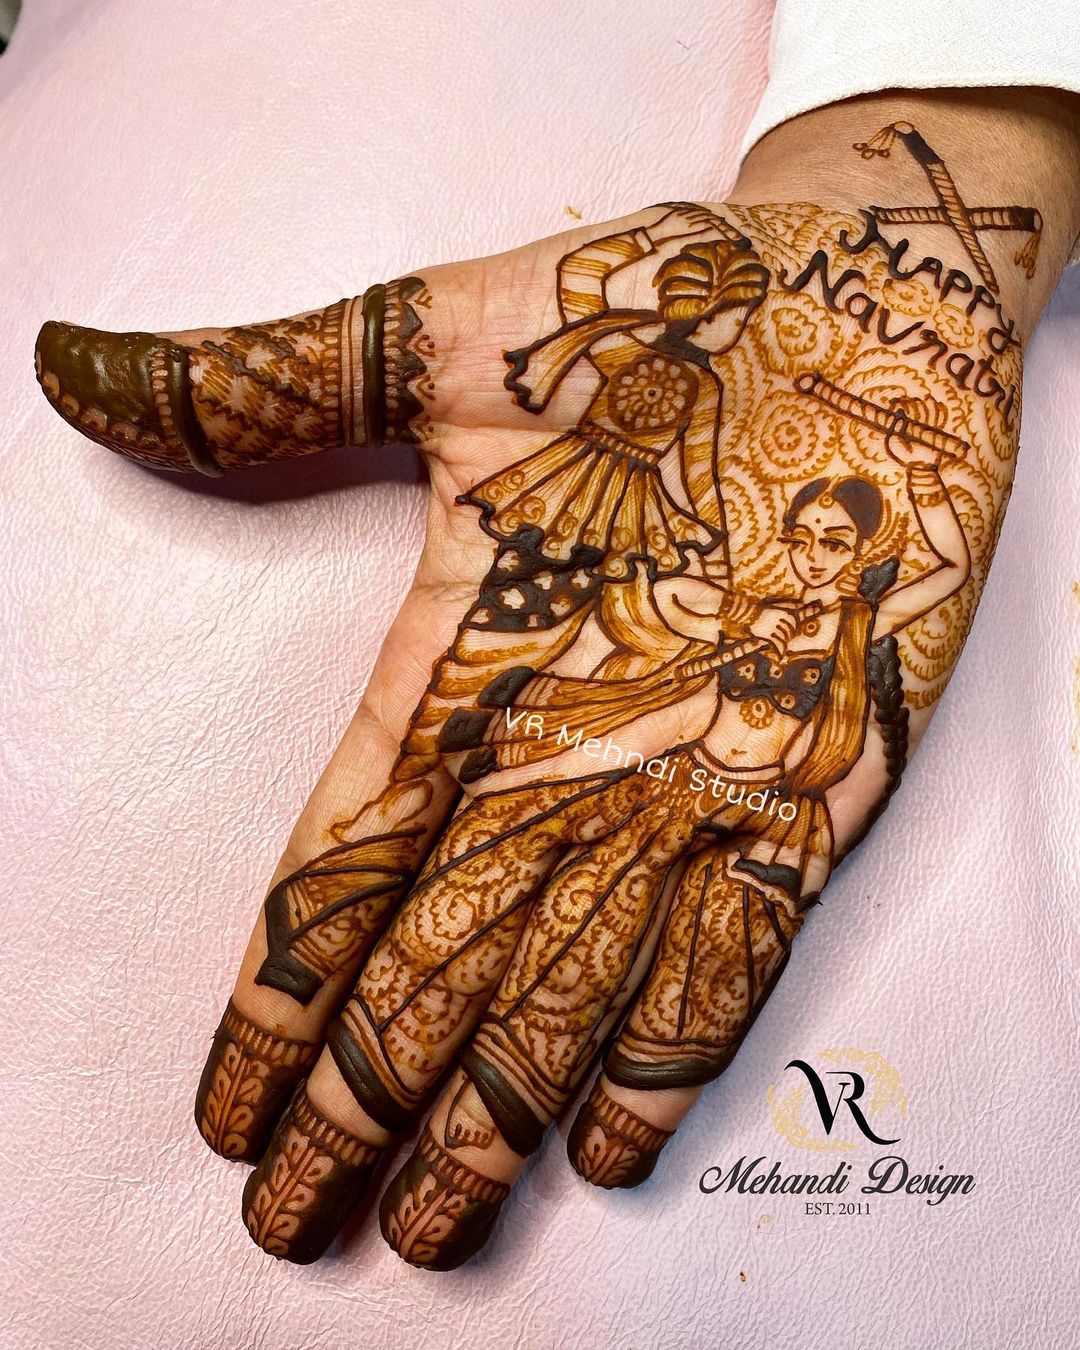 Easy and Simple Gorgeous Mehndi Design for Durga Puja/Teej || Henna Design  | Easy and Simple Gorgeous Mehndi Design for Durga Puja/Teej || Henna Design  #teej #teejmehndidesign #simplemehndidesign #easymehndidesign... | By  Blossoms